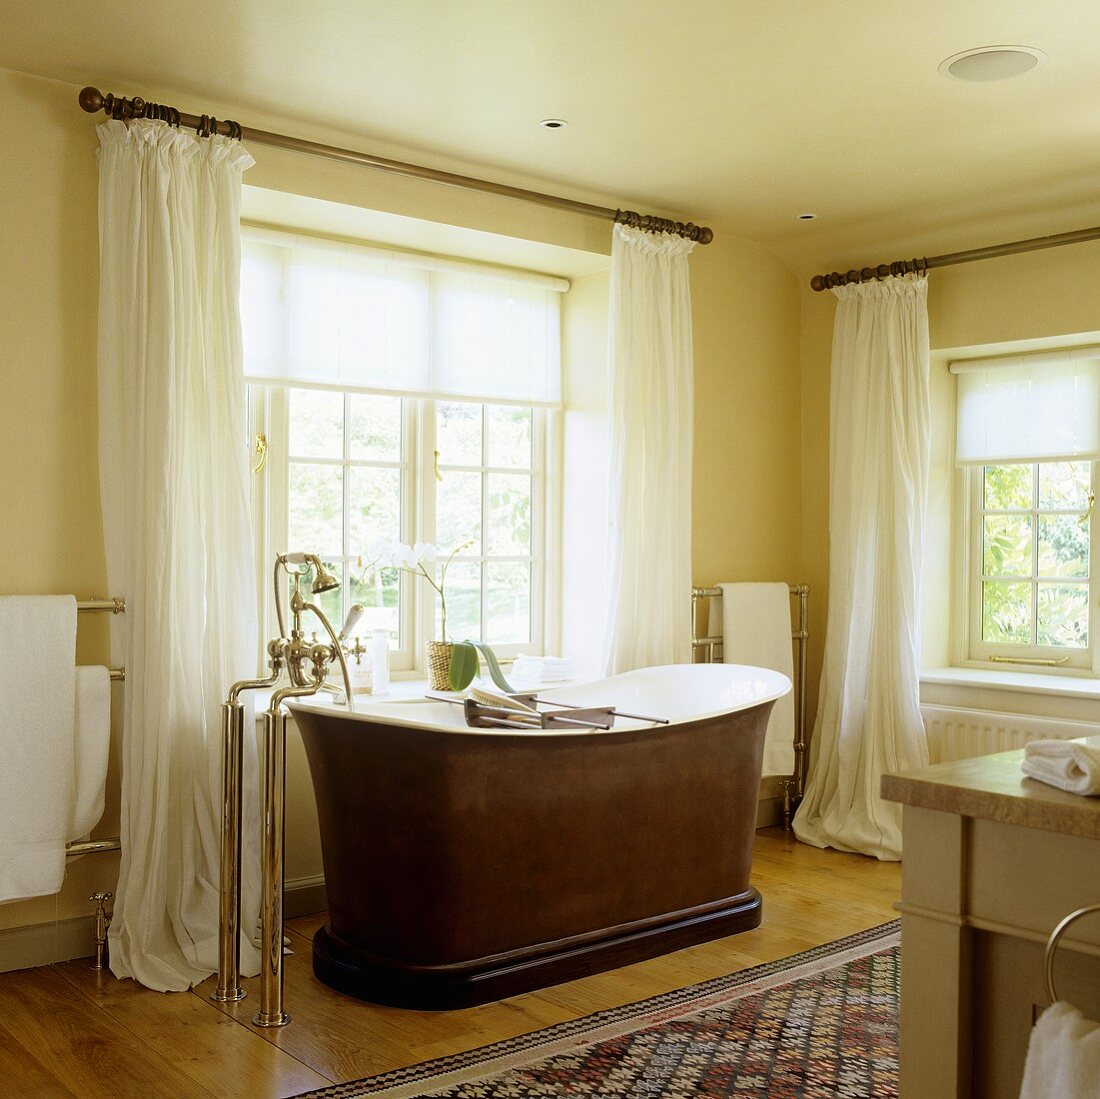 A bathroom in an old English country house with a free-standing bathtub and antique standing taps